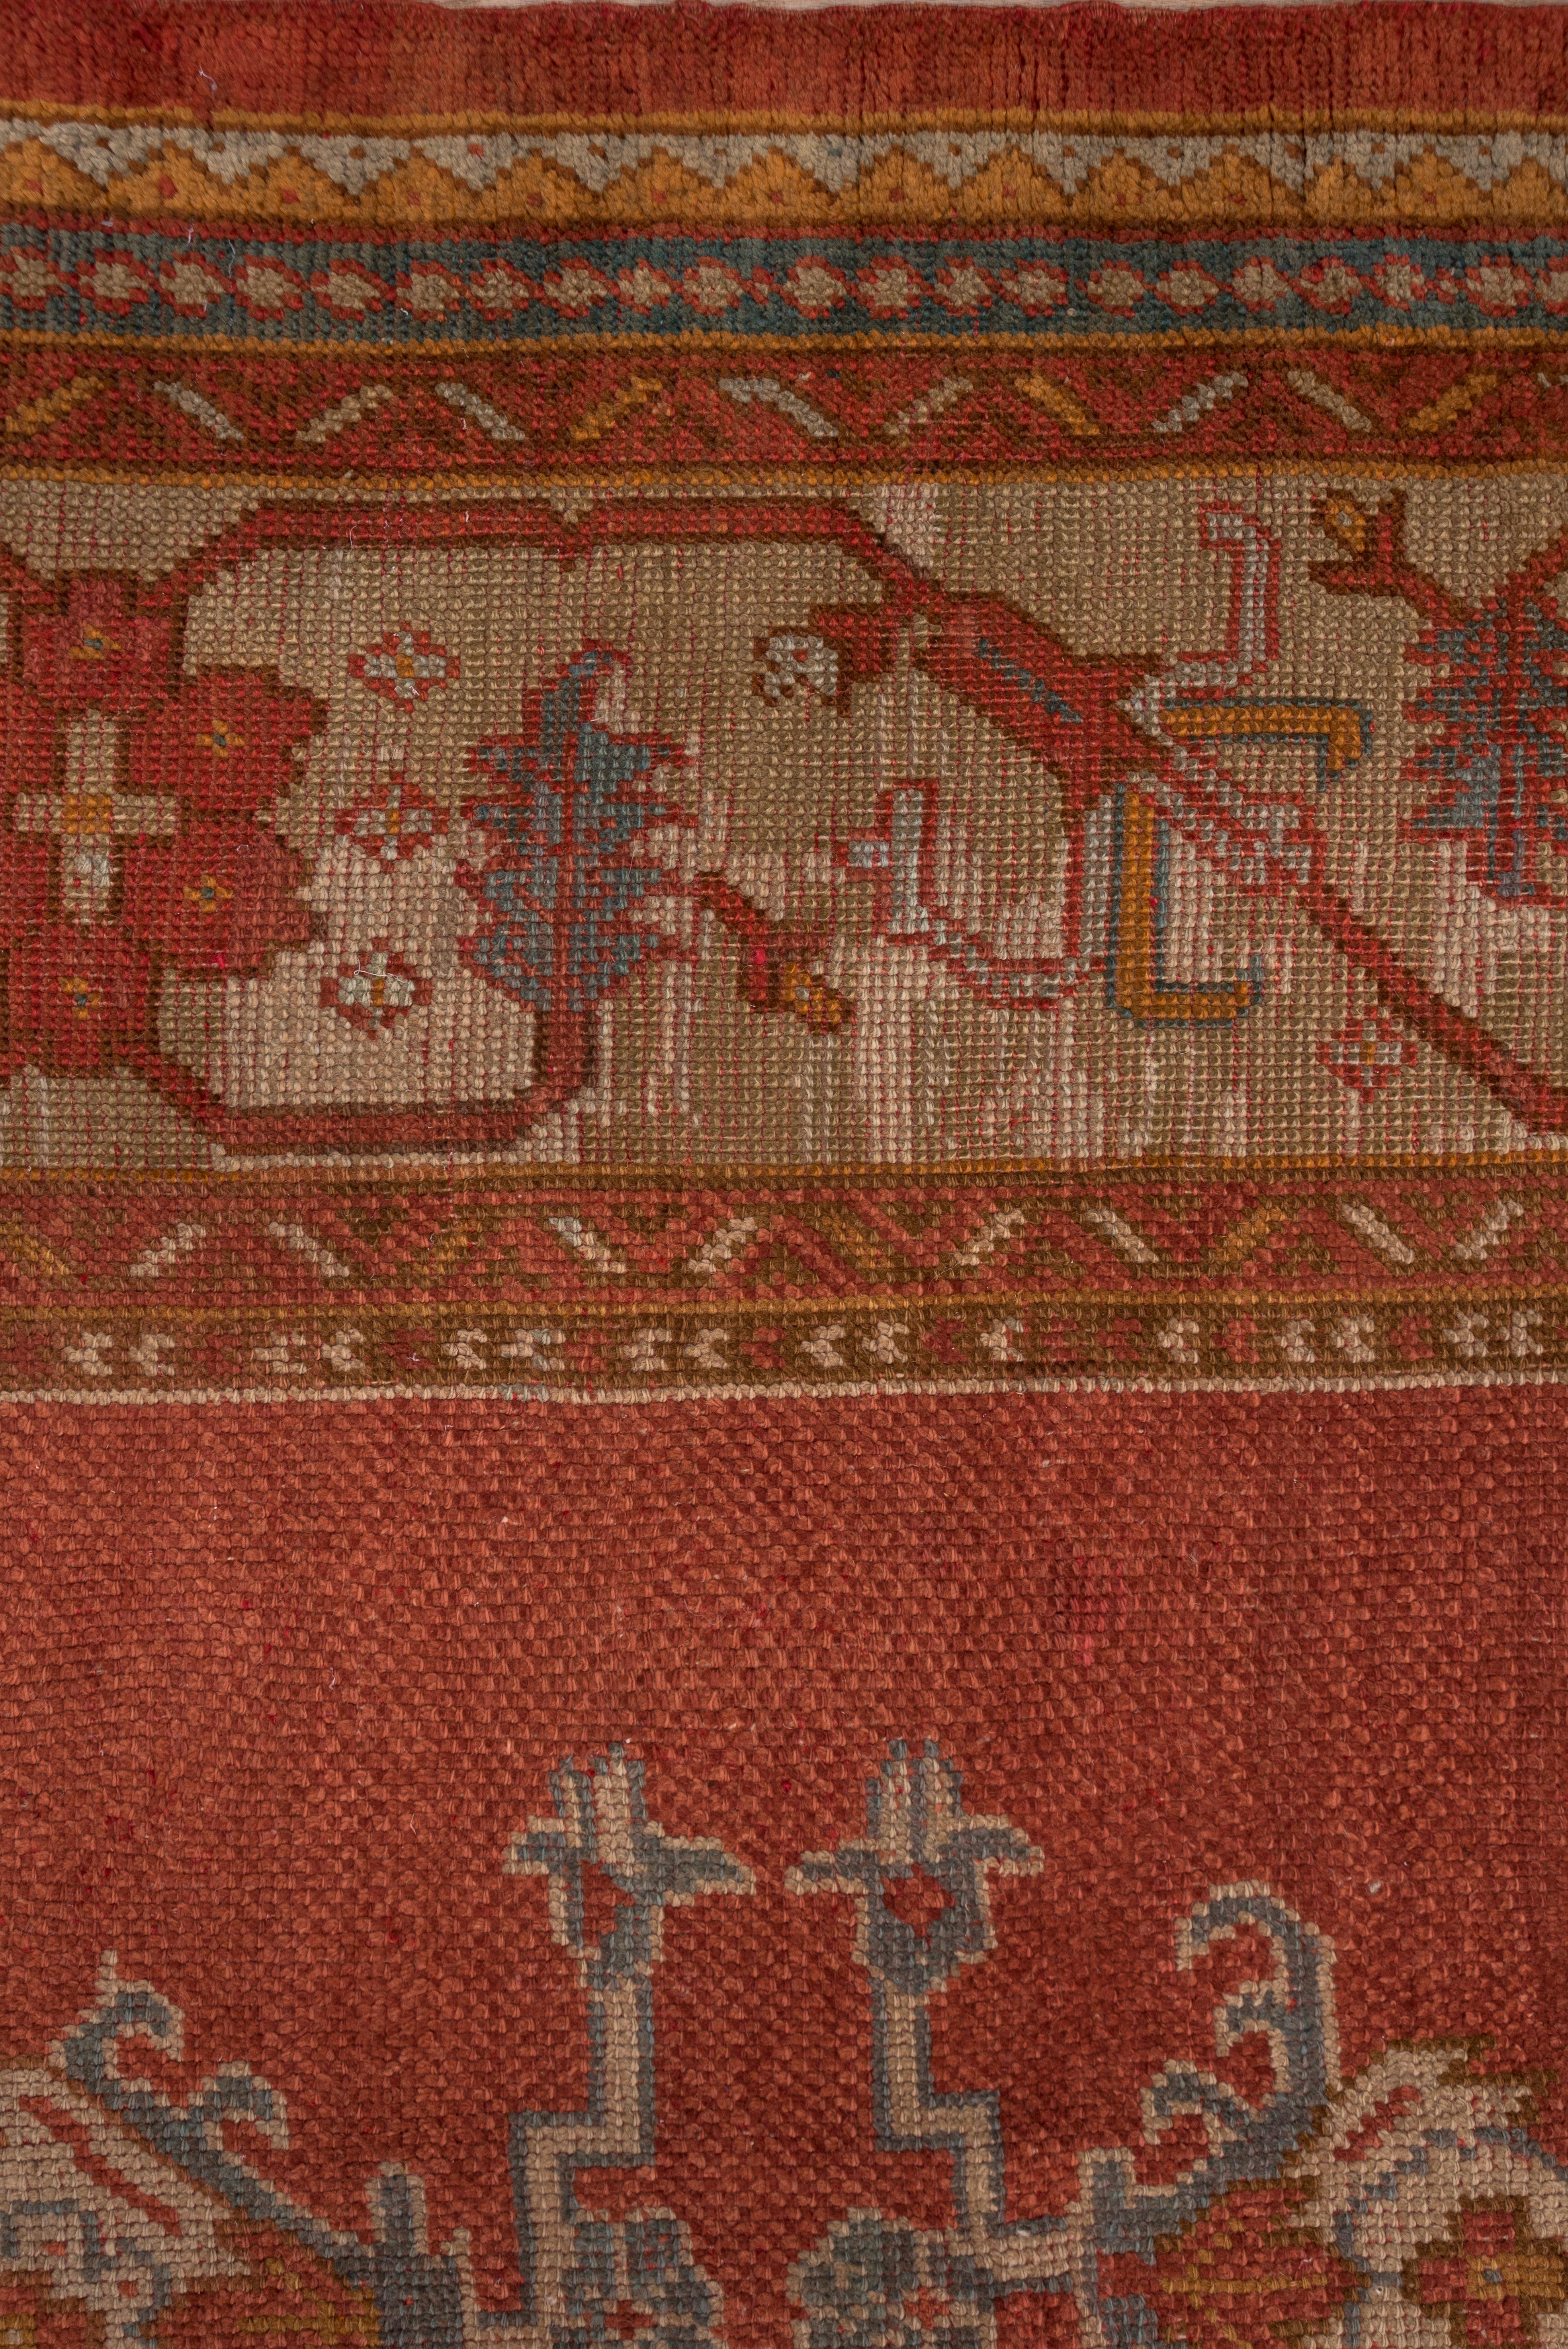 Hand-Knotted Red Antique Oushak Carpet, circa 1910s